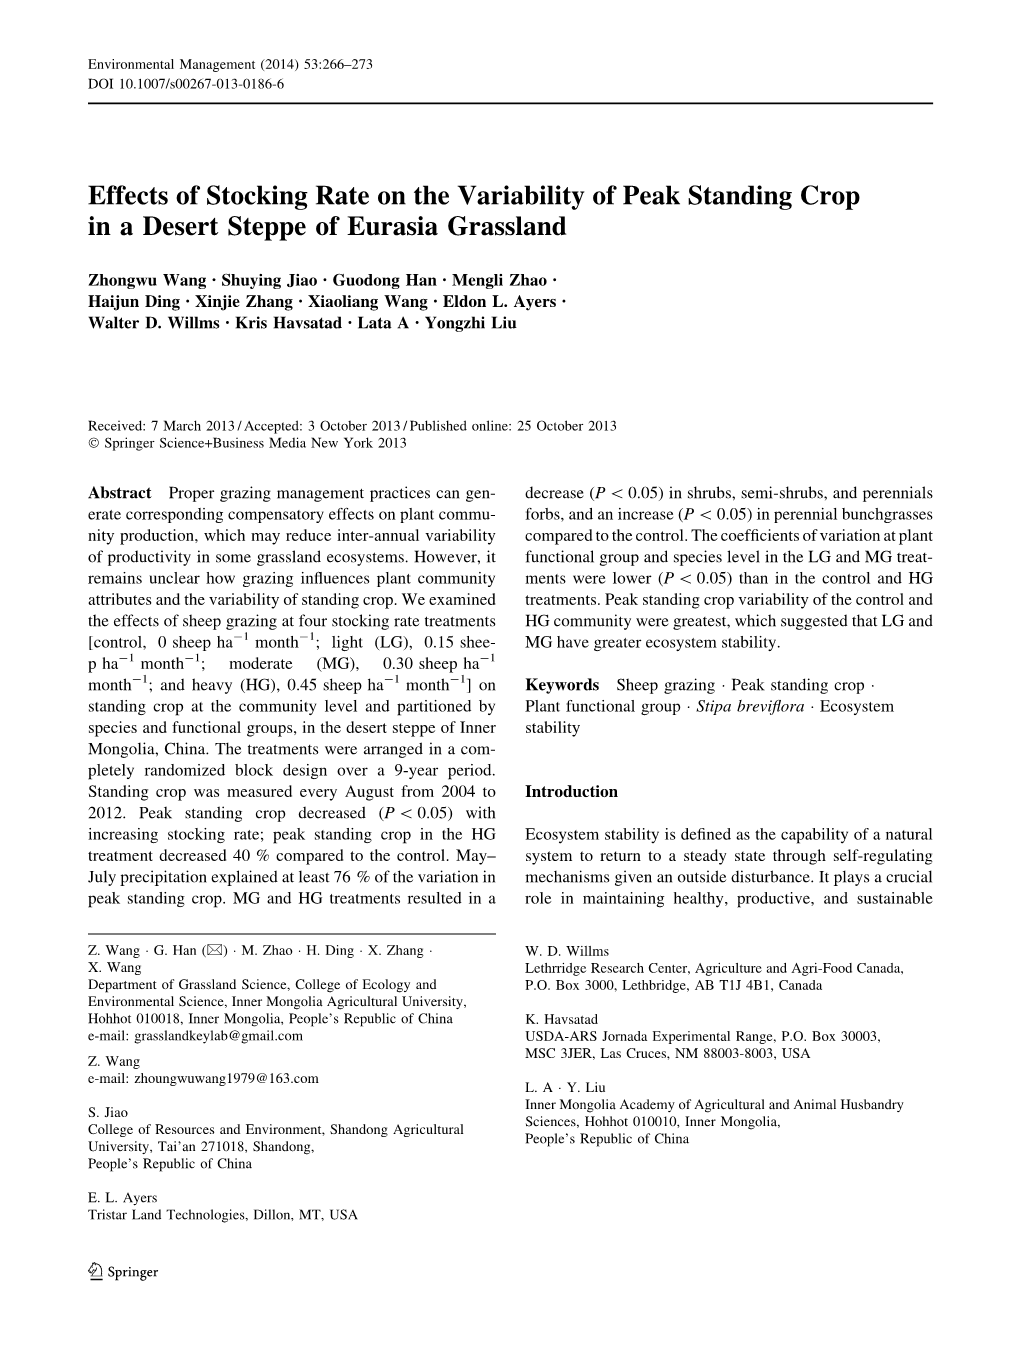 Effects of Stocking Rate on the Variability of Peak Standing Crop in a Desert Steppe of Eurasia Grassland